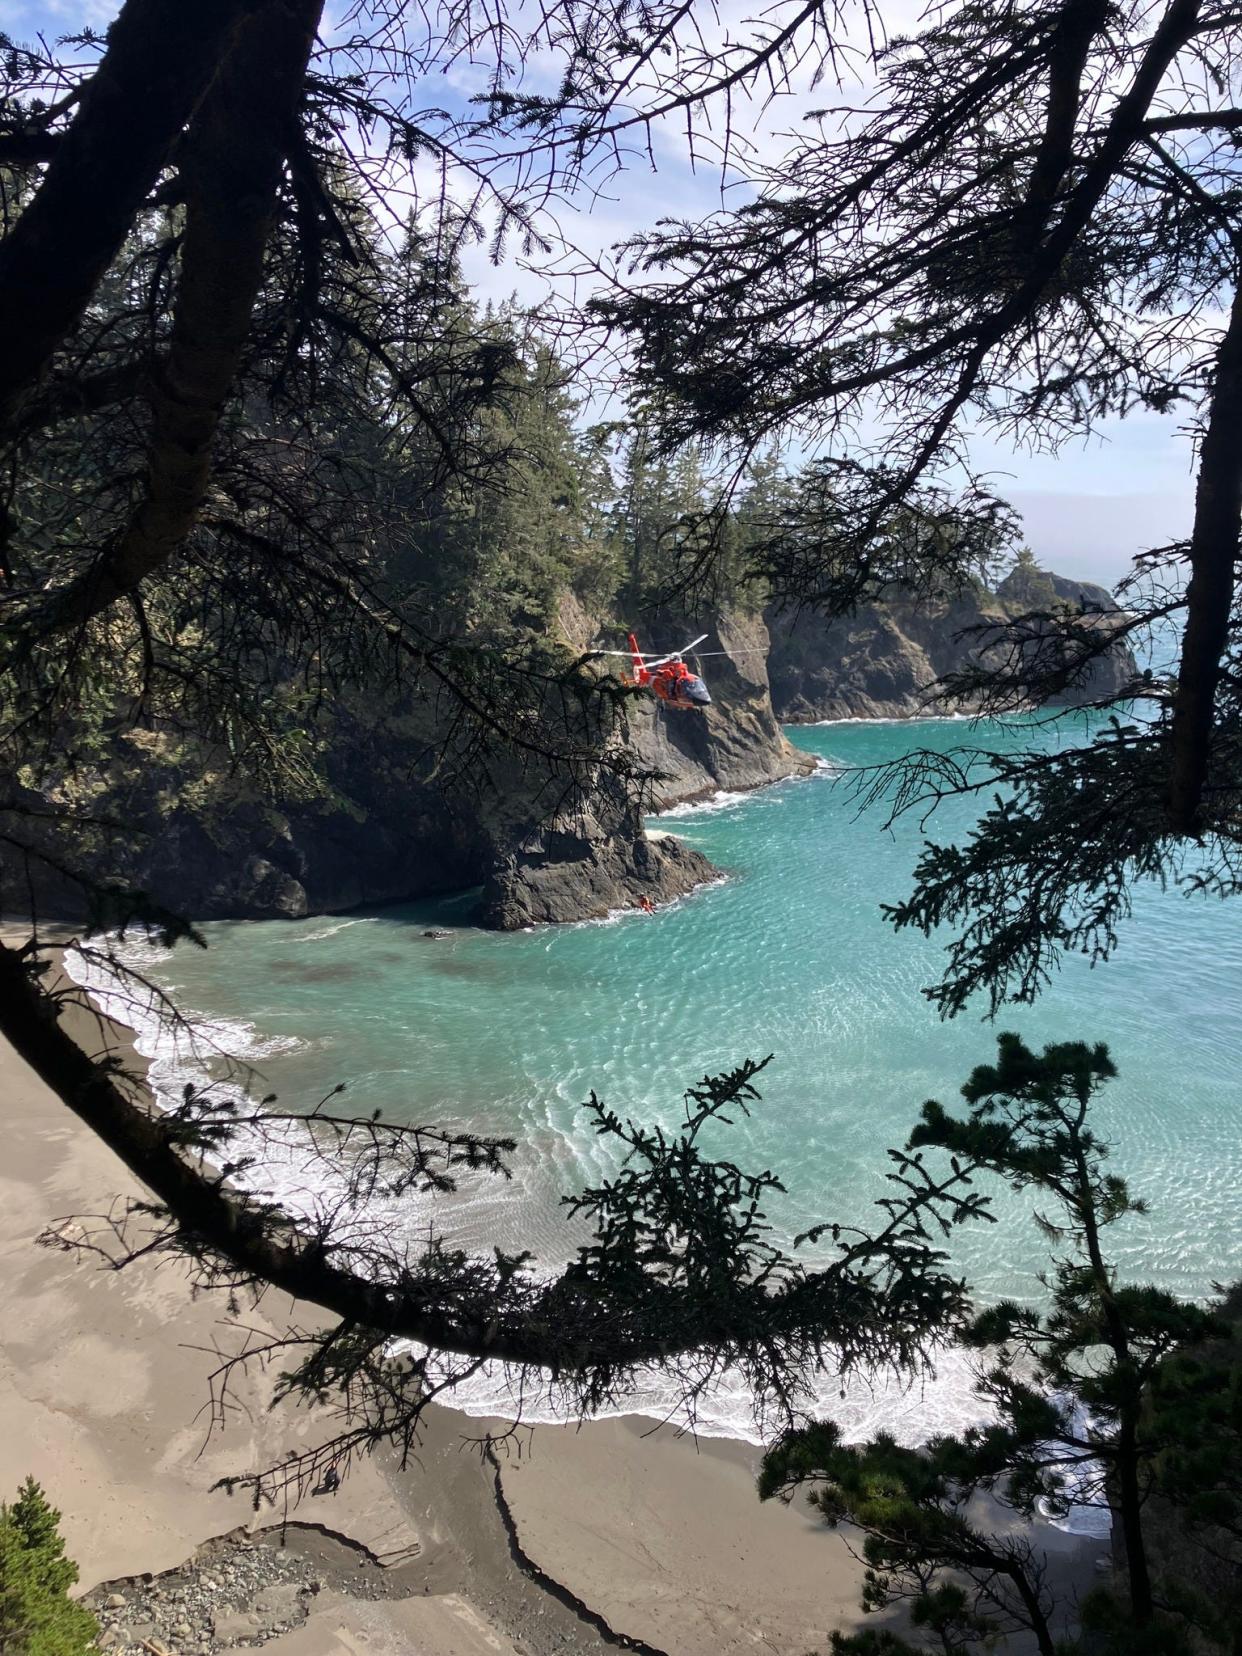 A Grants Pass man died and three children were rescued April 22 after a fall from a cliff at Boardman Corridor north of Brookings on Oregon's south coast. Rescue teams used ropes to rescue the children.